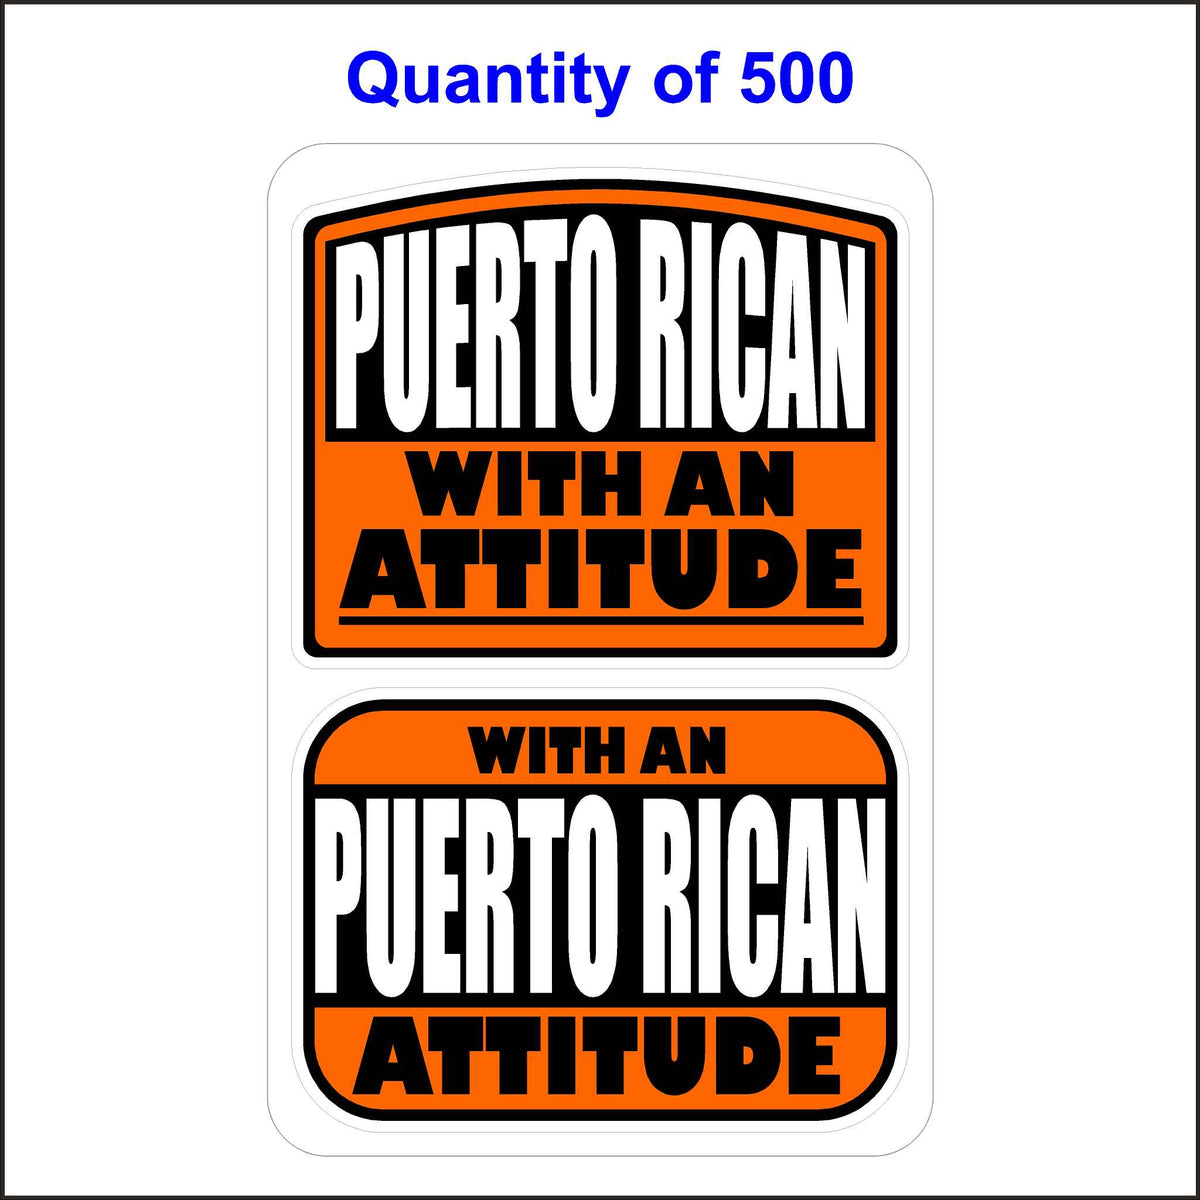 Puerto Rican With an Attitude Stickers 500 Quantity.